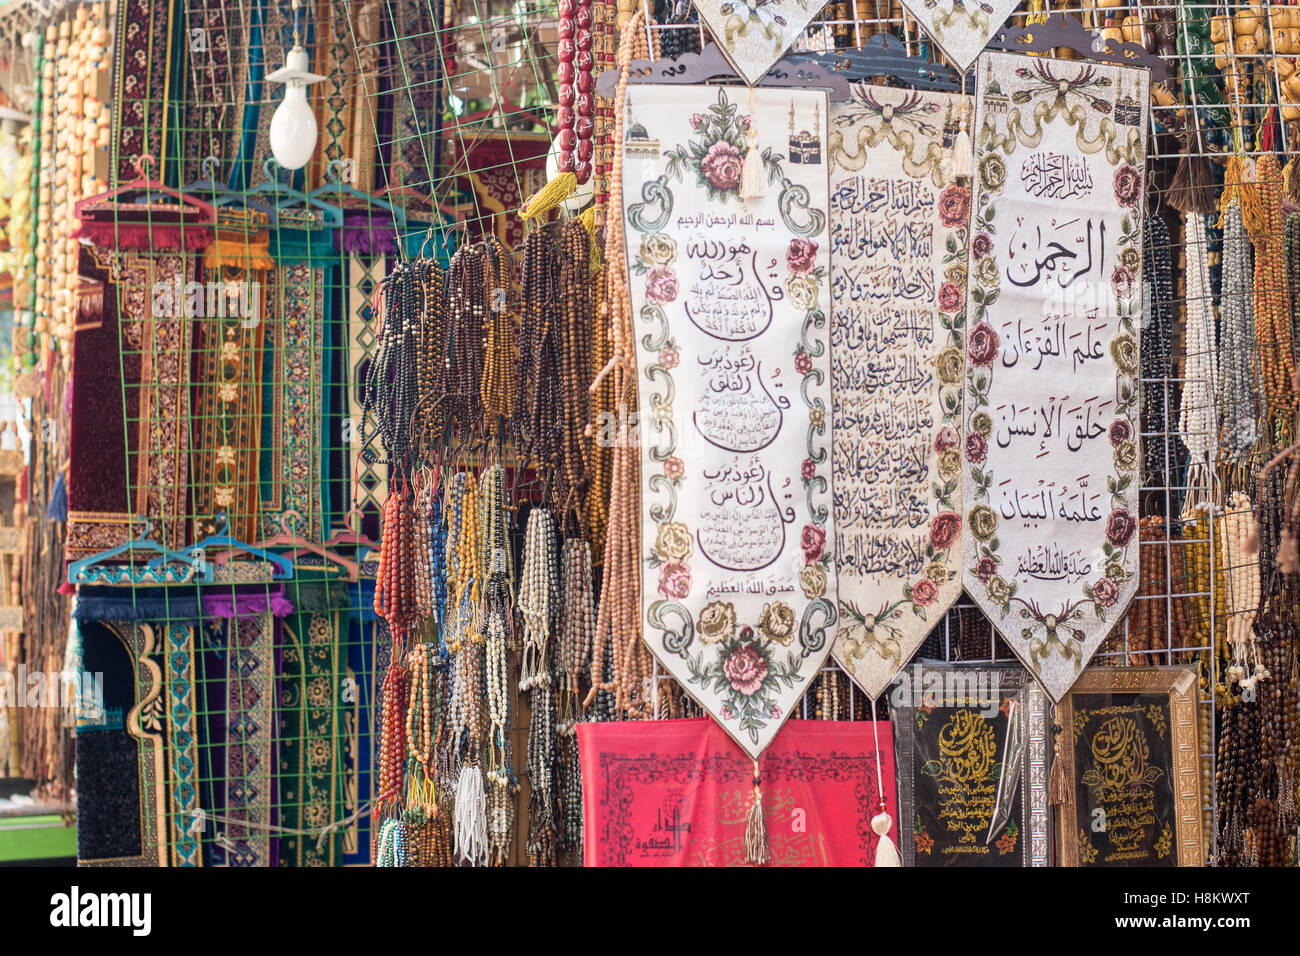 Cairo, Egypt. Close up of Arabic embroidery for sale in the outdoor bazaar/ flea market Khan el-Khalili in Cairo. Stock Photo